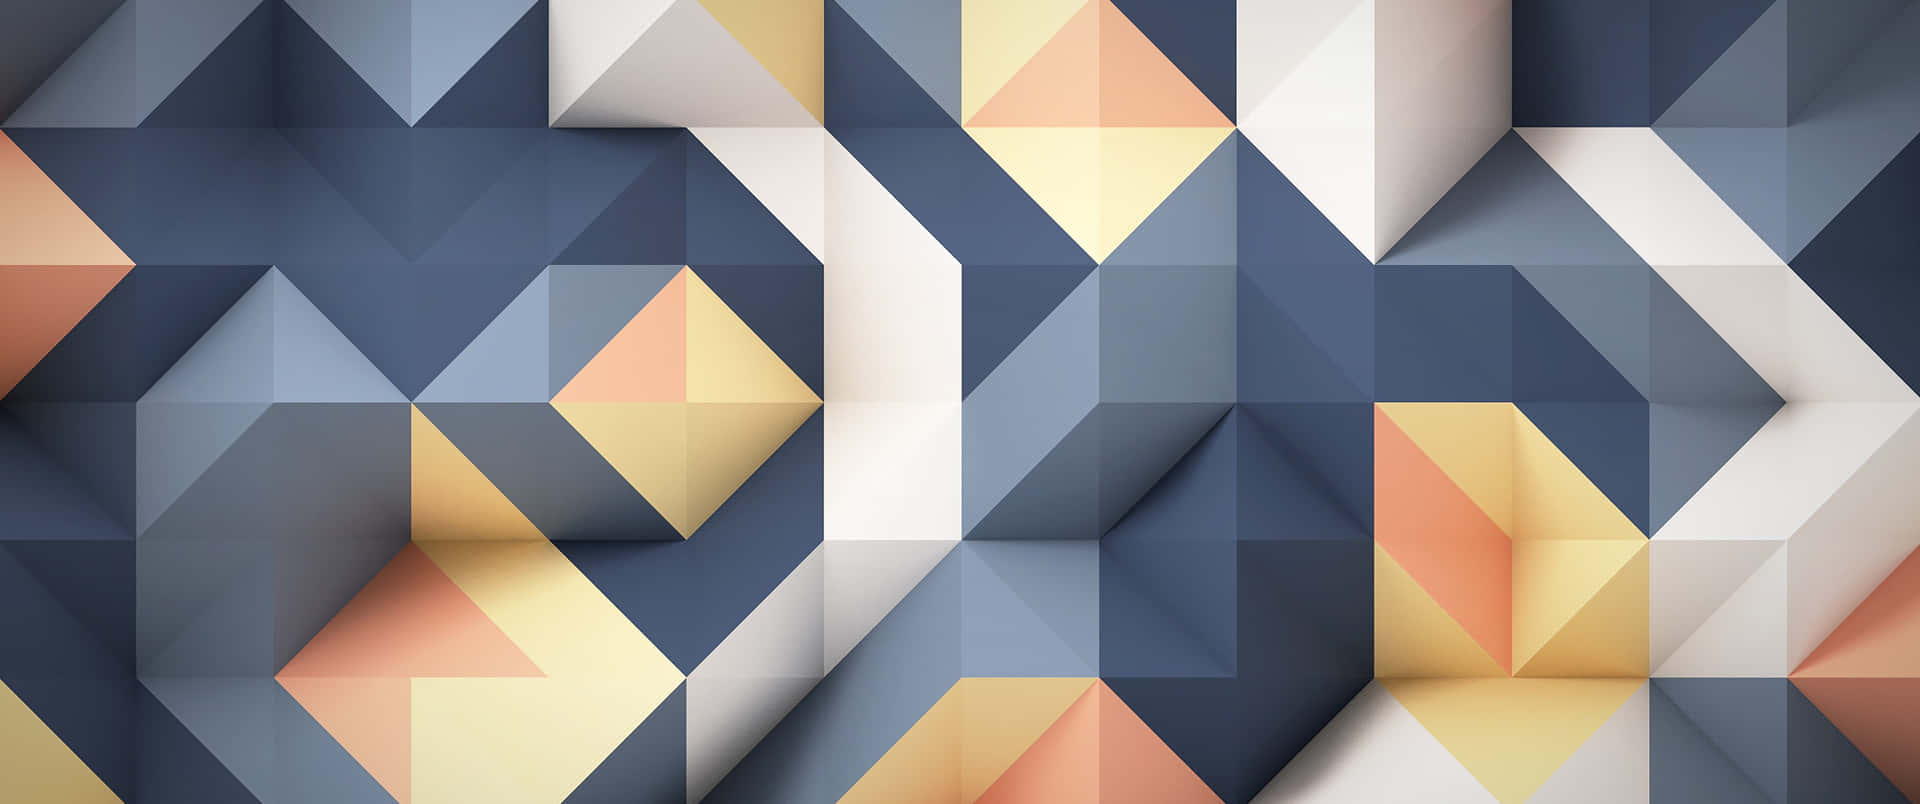 Low Poly design for minimalist wall art